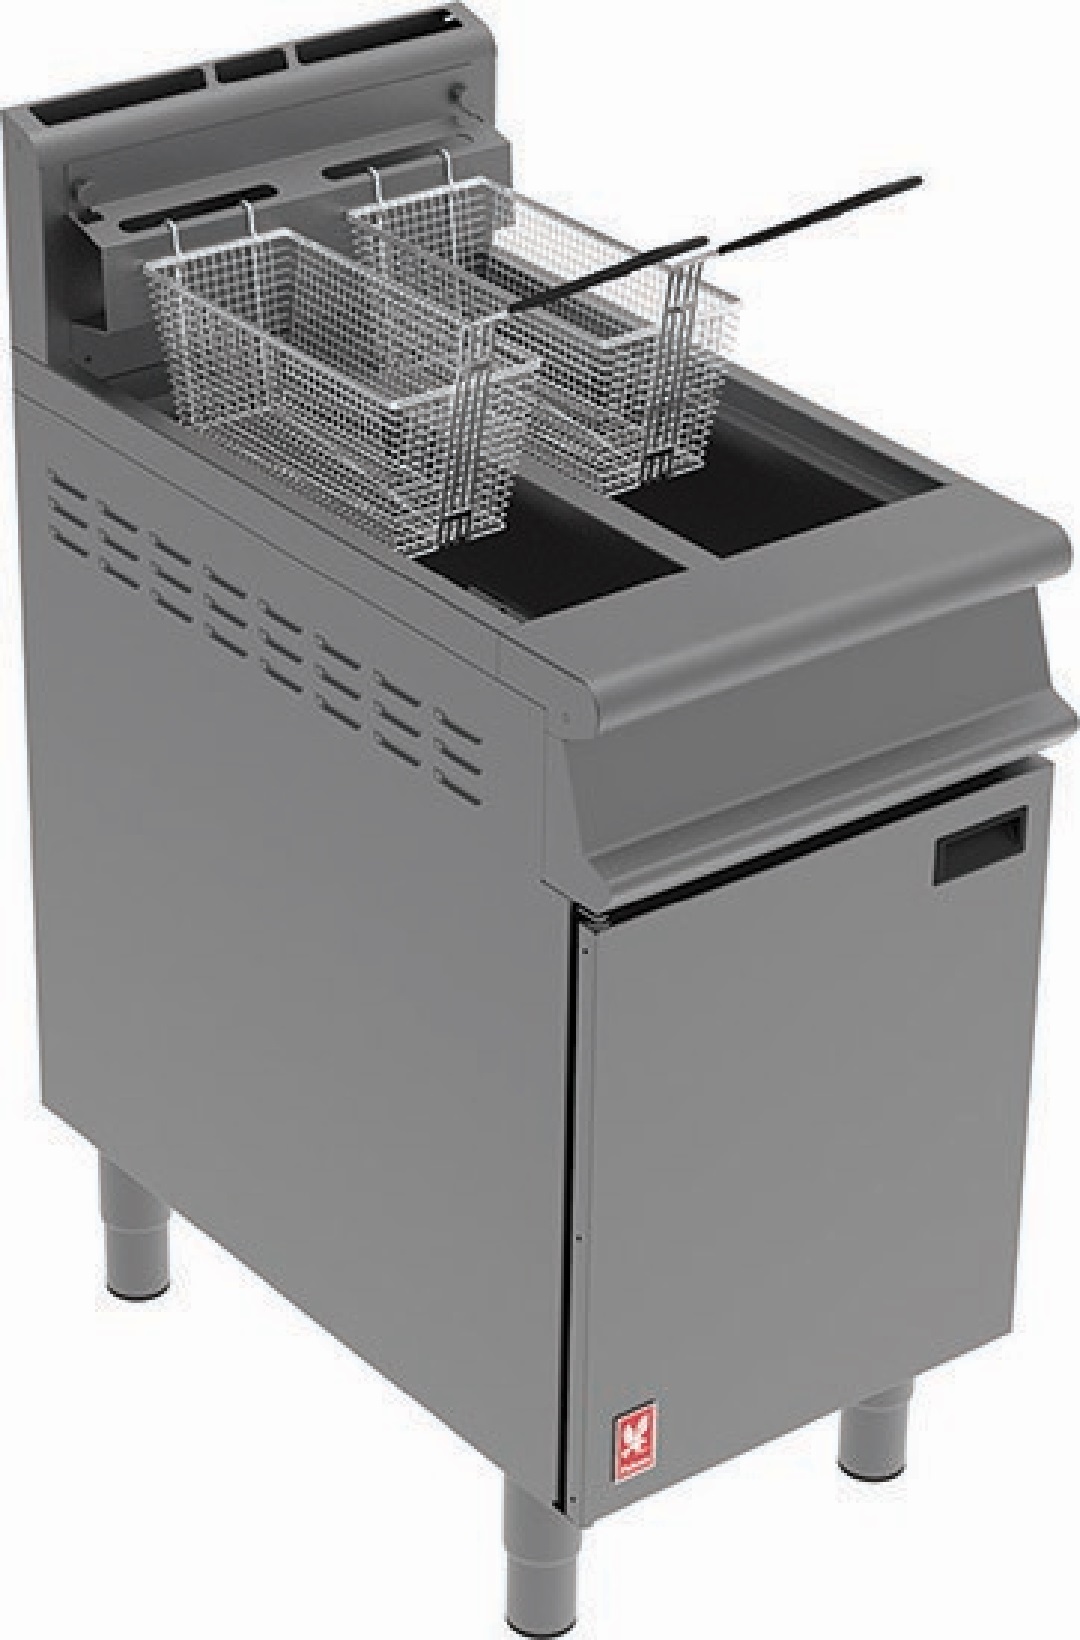 Falcon Dominator Plus G3845F Fryer With In Built Filtration